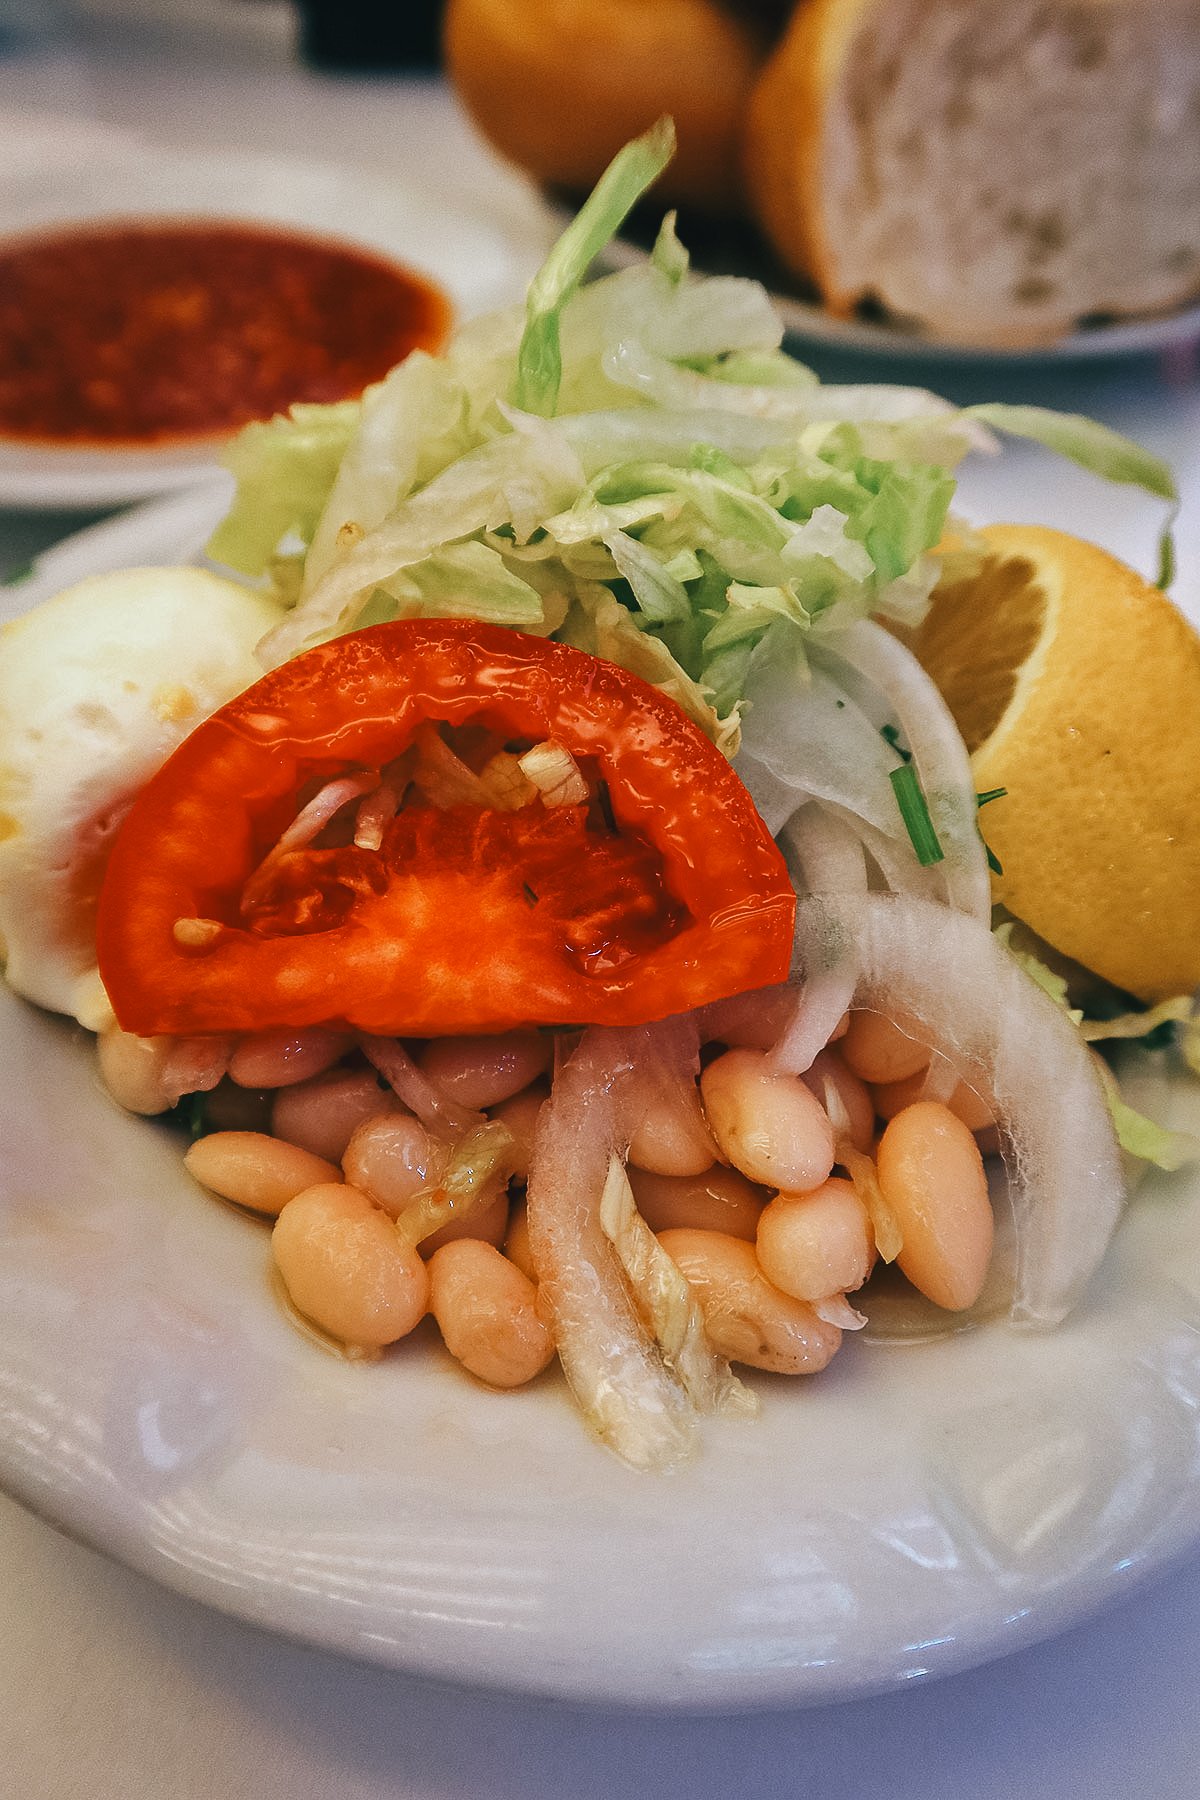 Bean salad at a restaurant in Istanbul